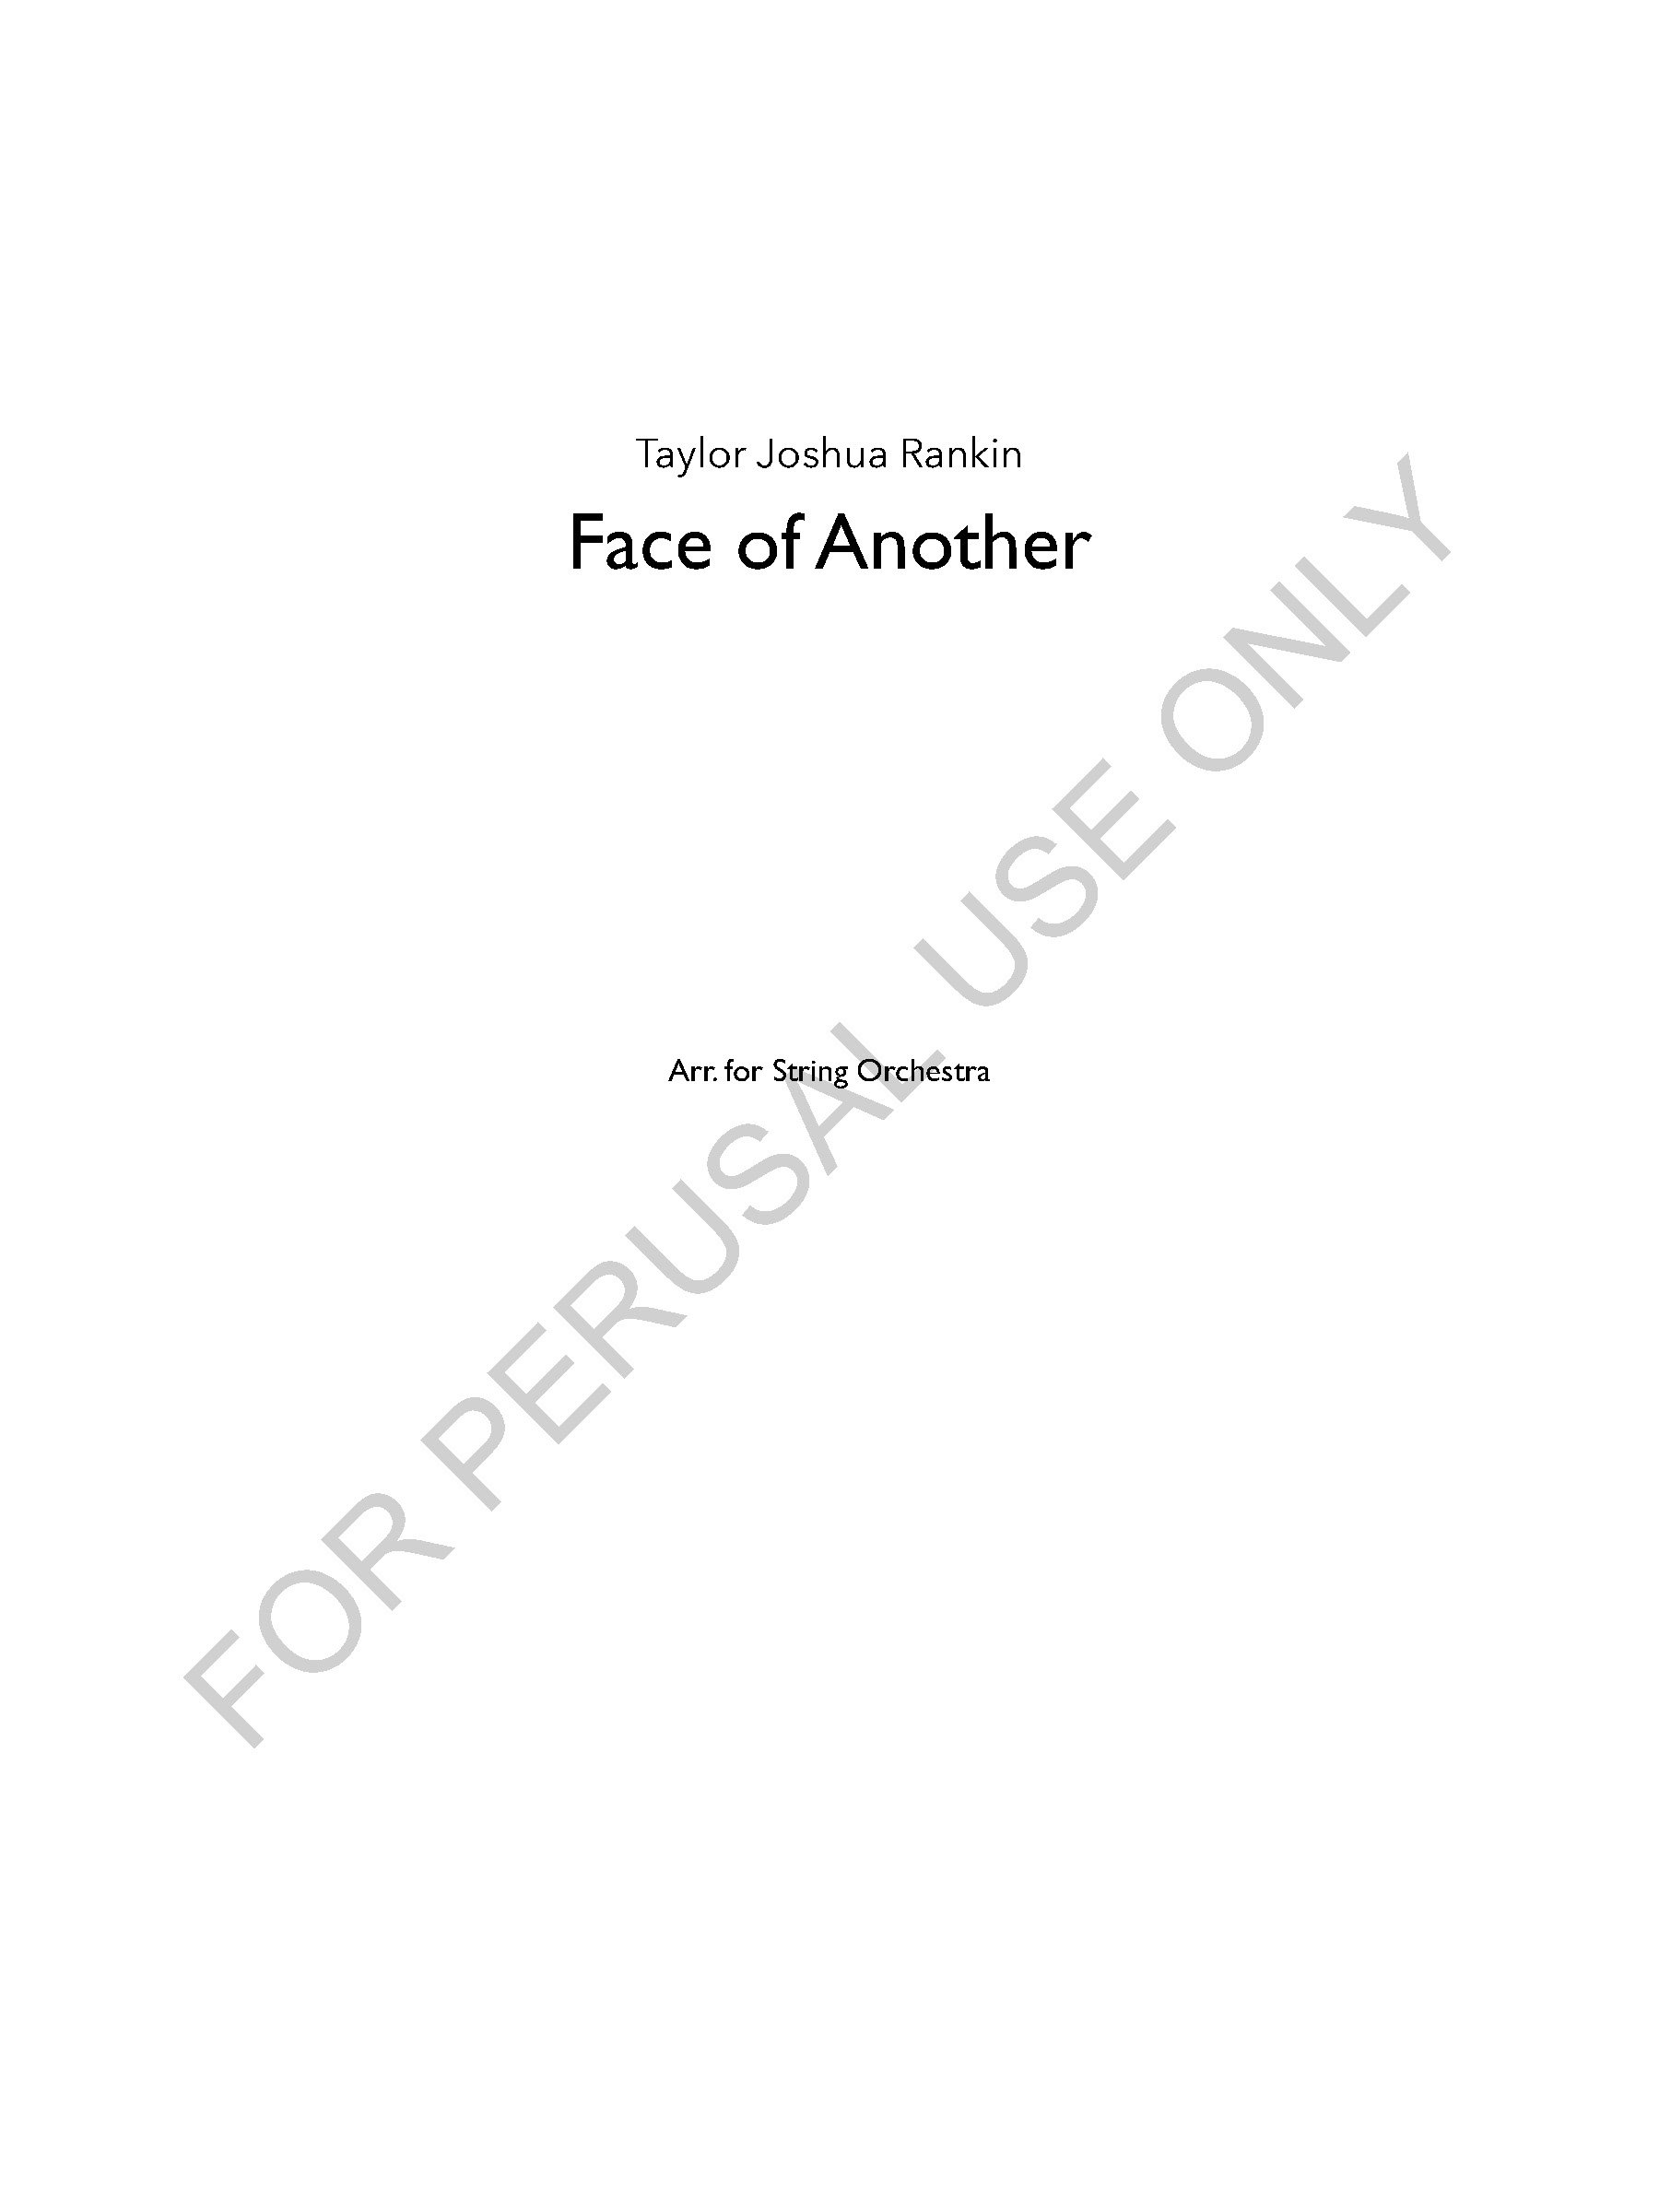 Face of Another - arr. for string orchestra - Full Score_Page_01.jpg